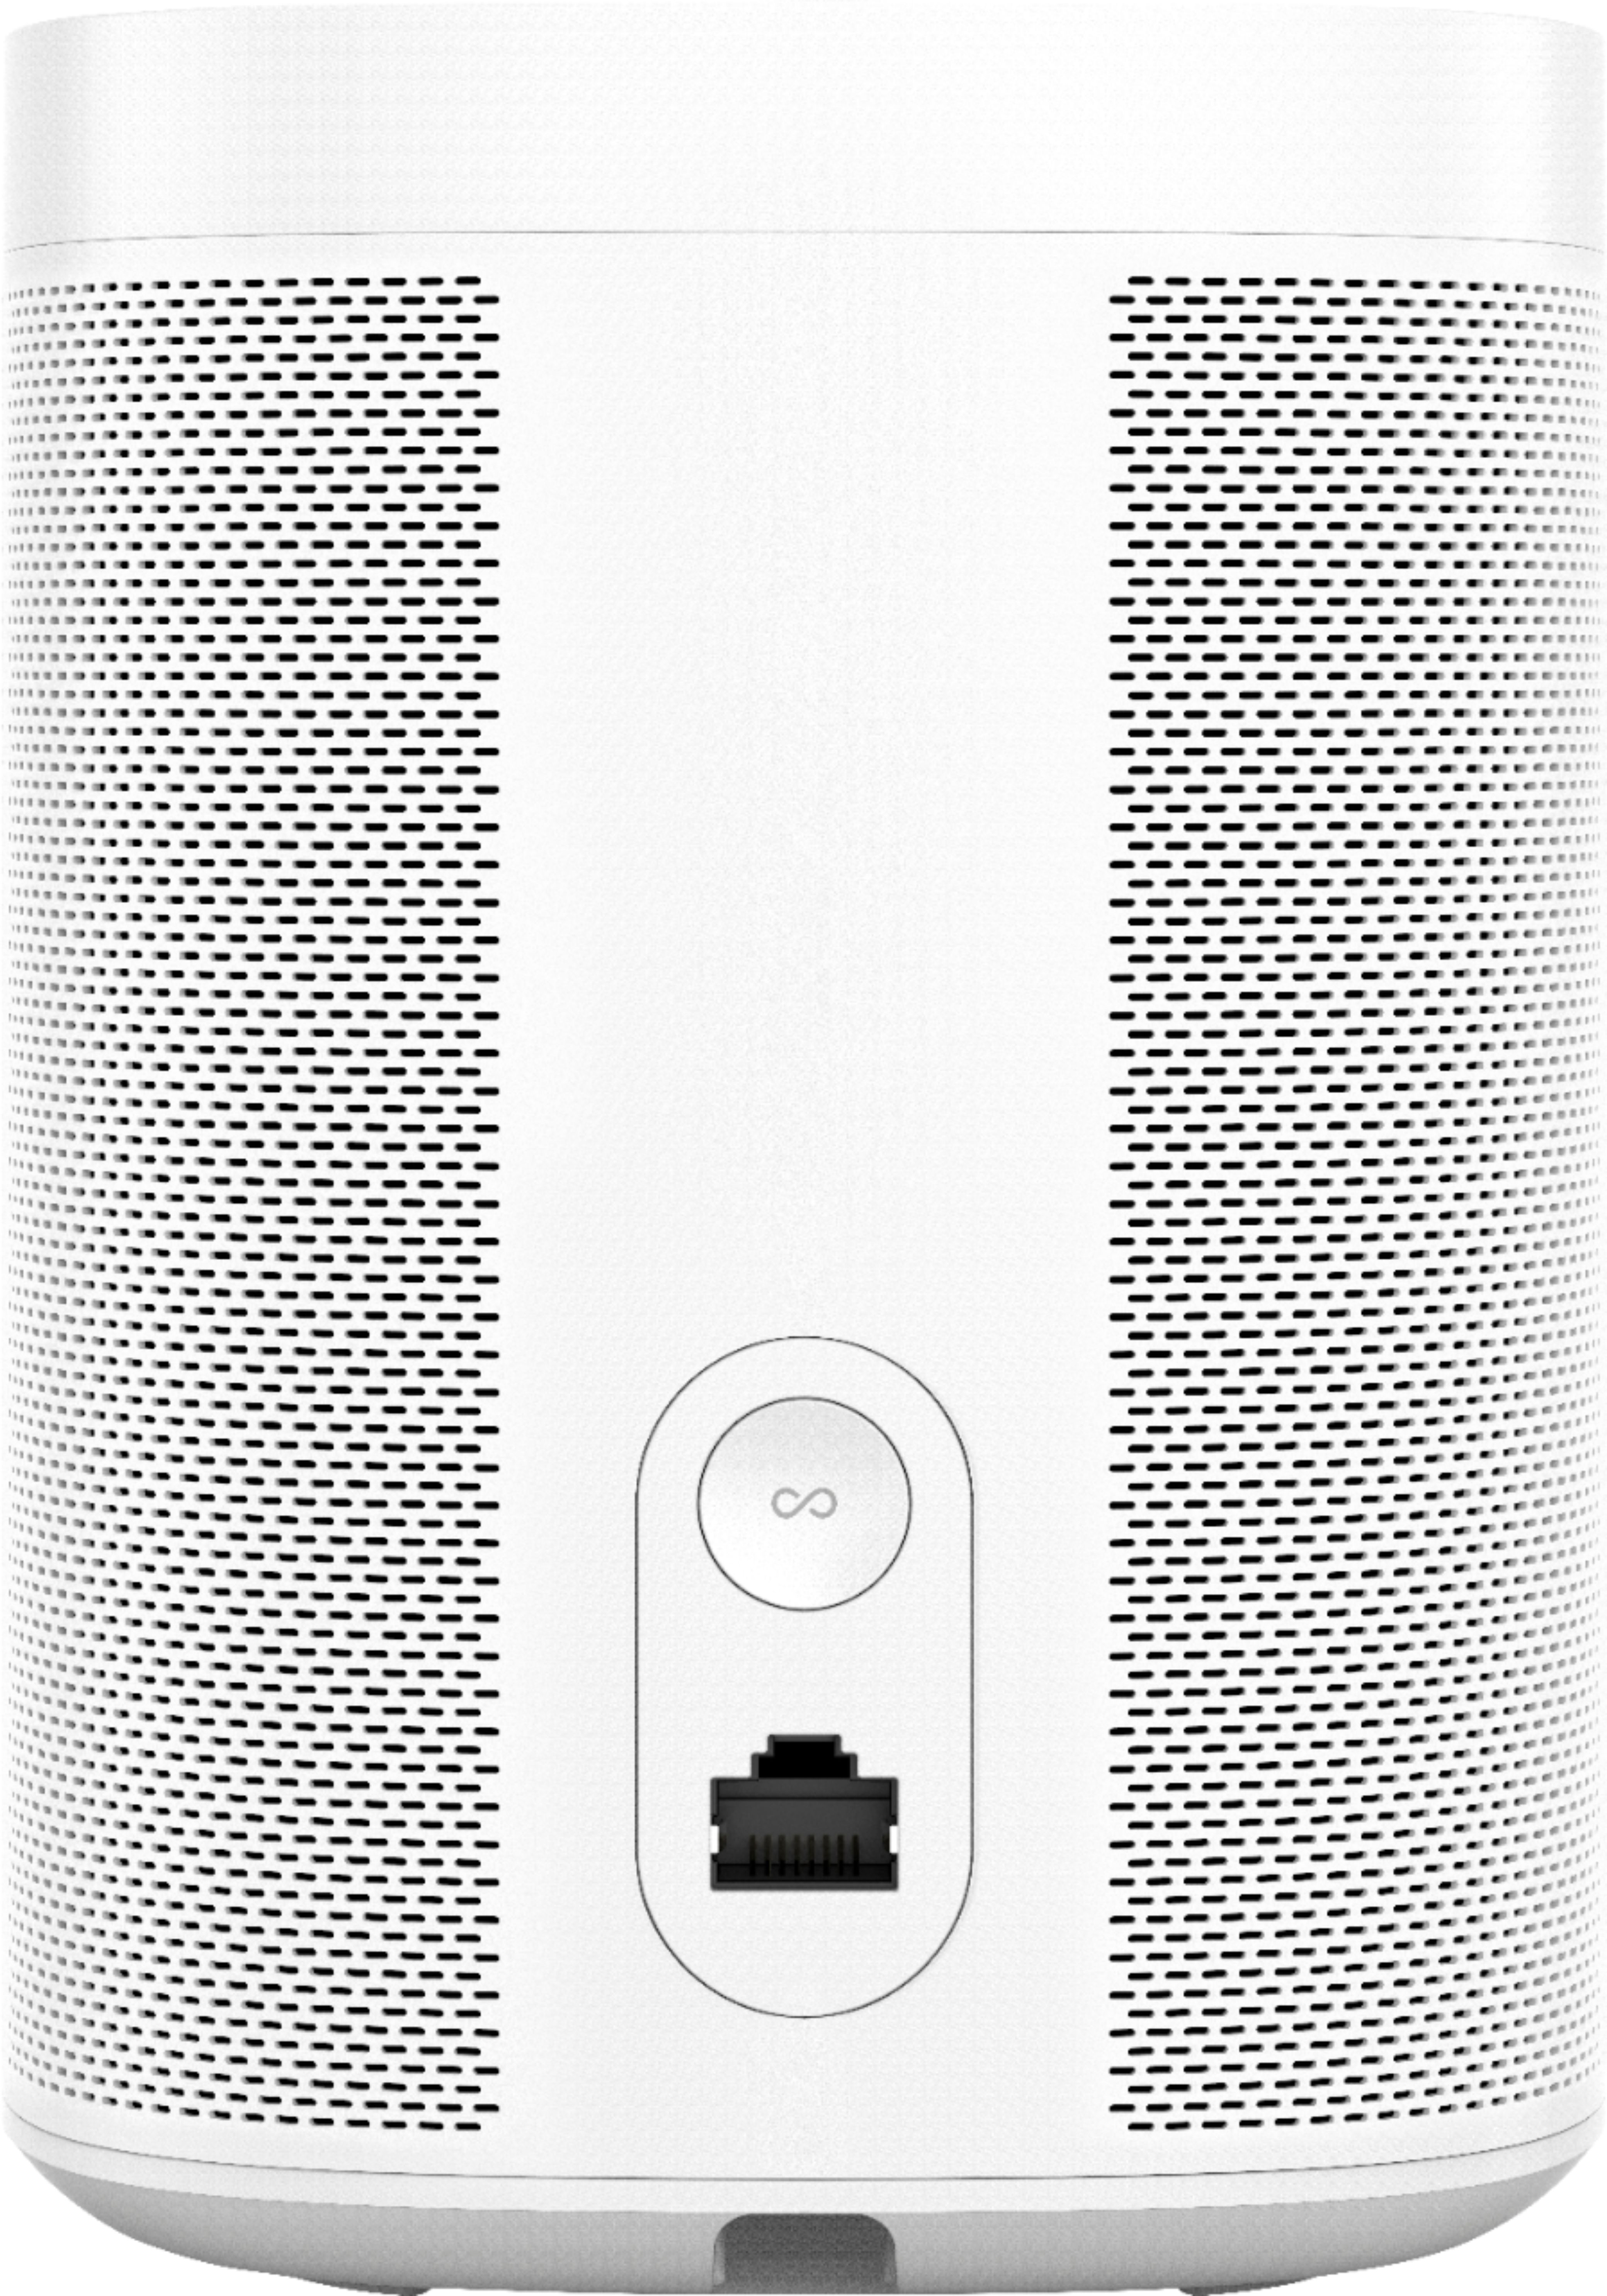 Back View: Denon - Home 250 Wireless Speaker with HEOS Built-in AirPlay 2 and Bluetooth - White